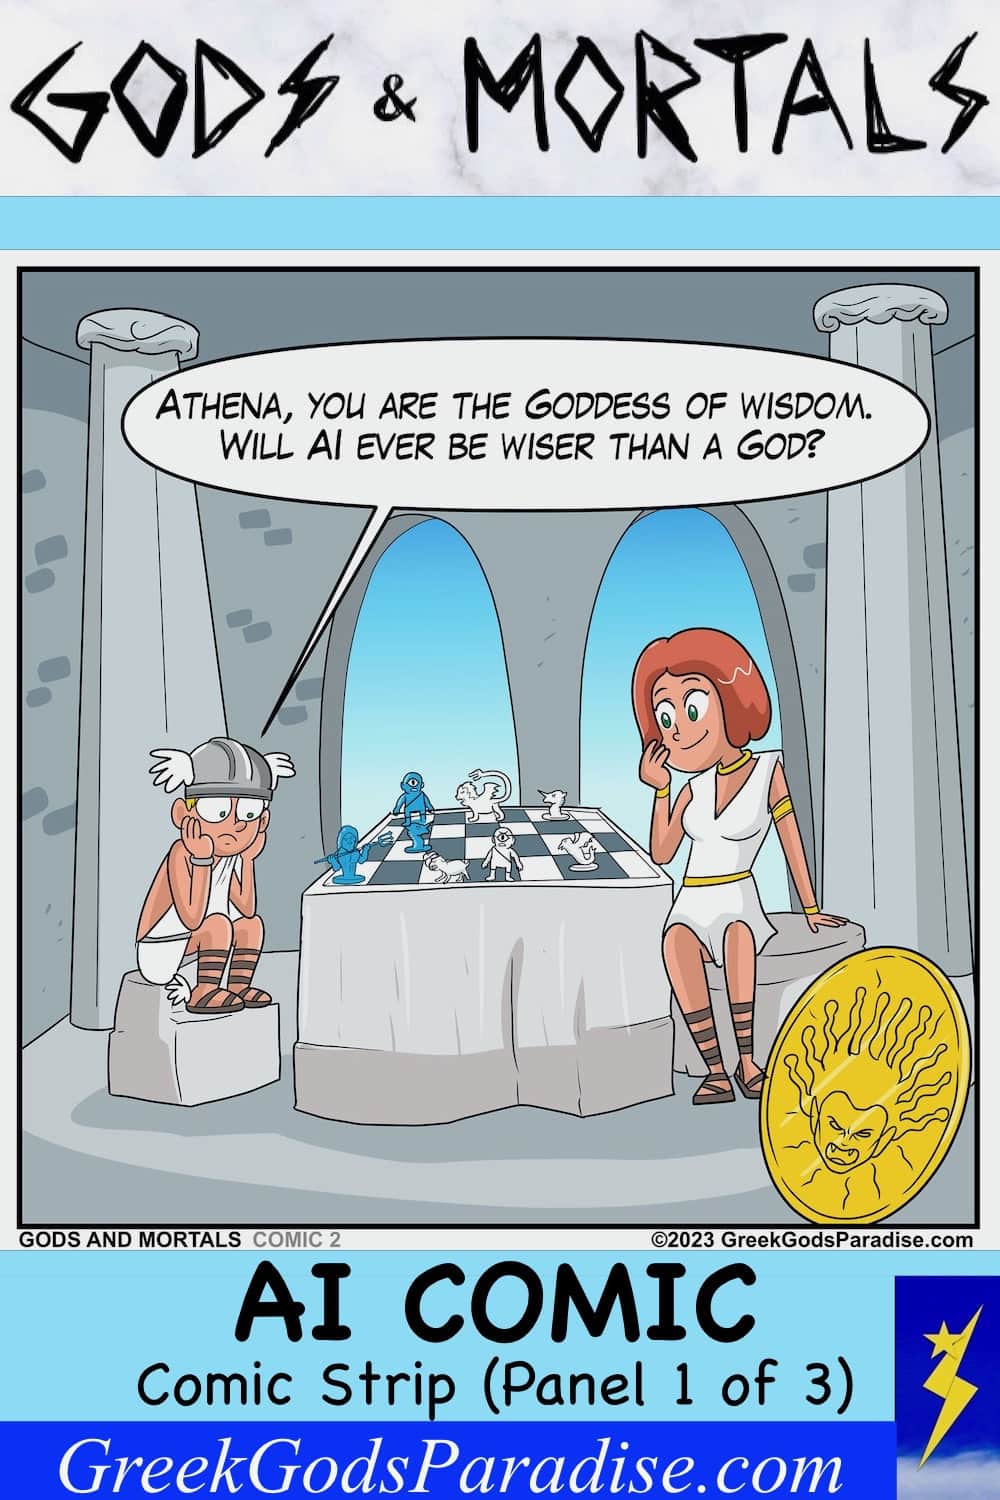 Gods and Mortals Comic Strip about AI Artificial Intelligence